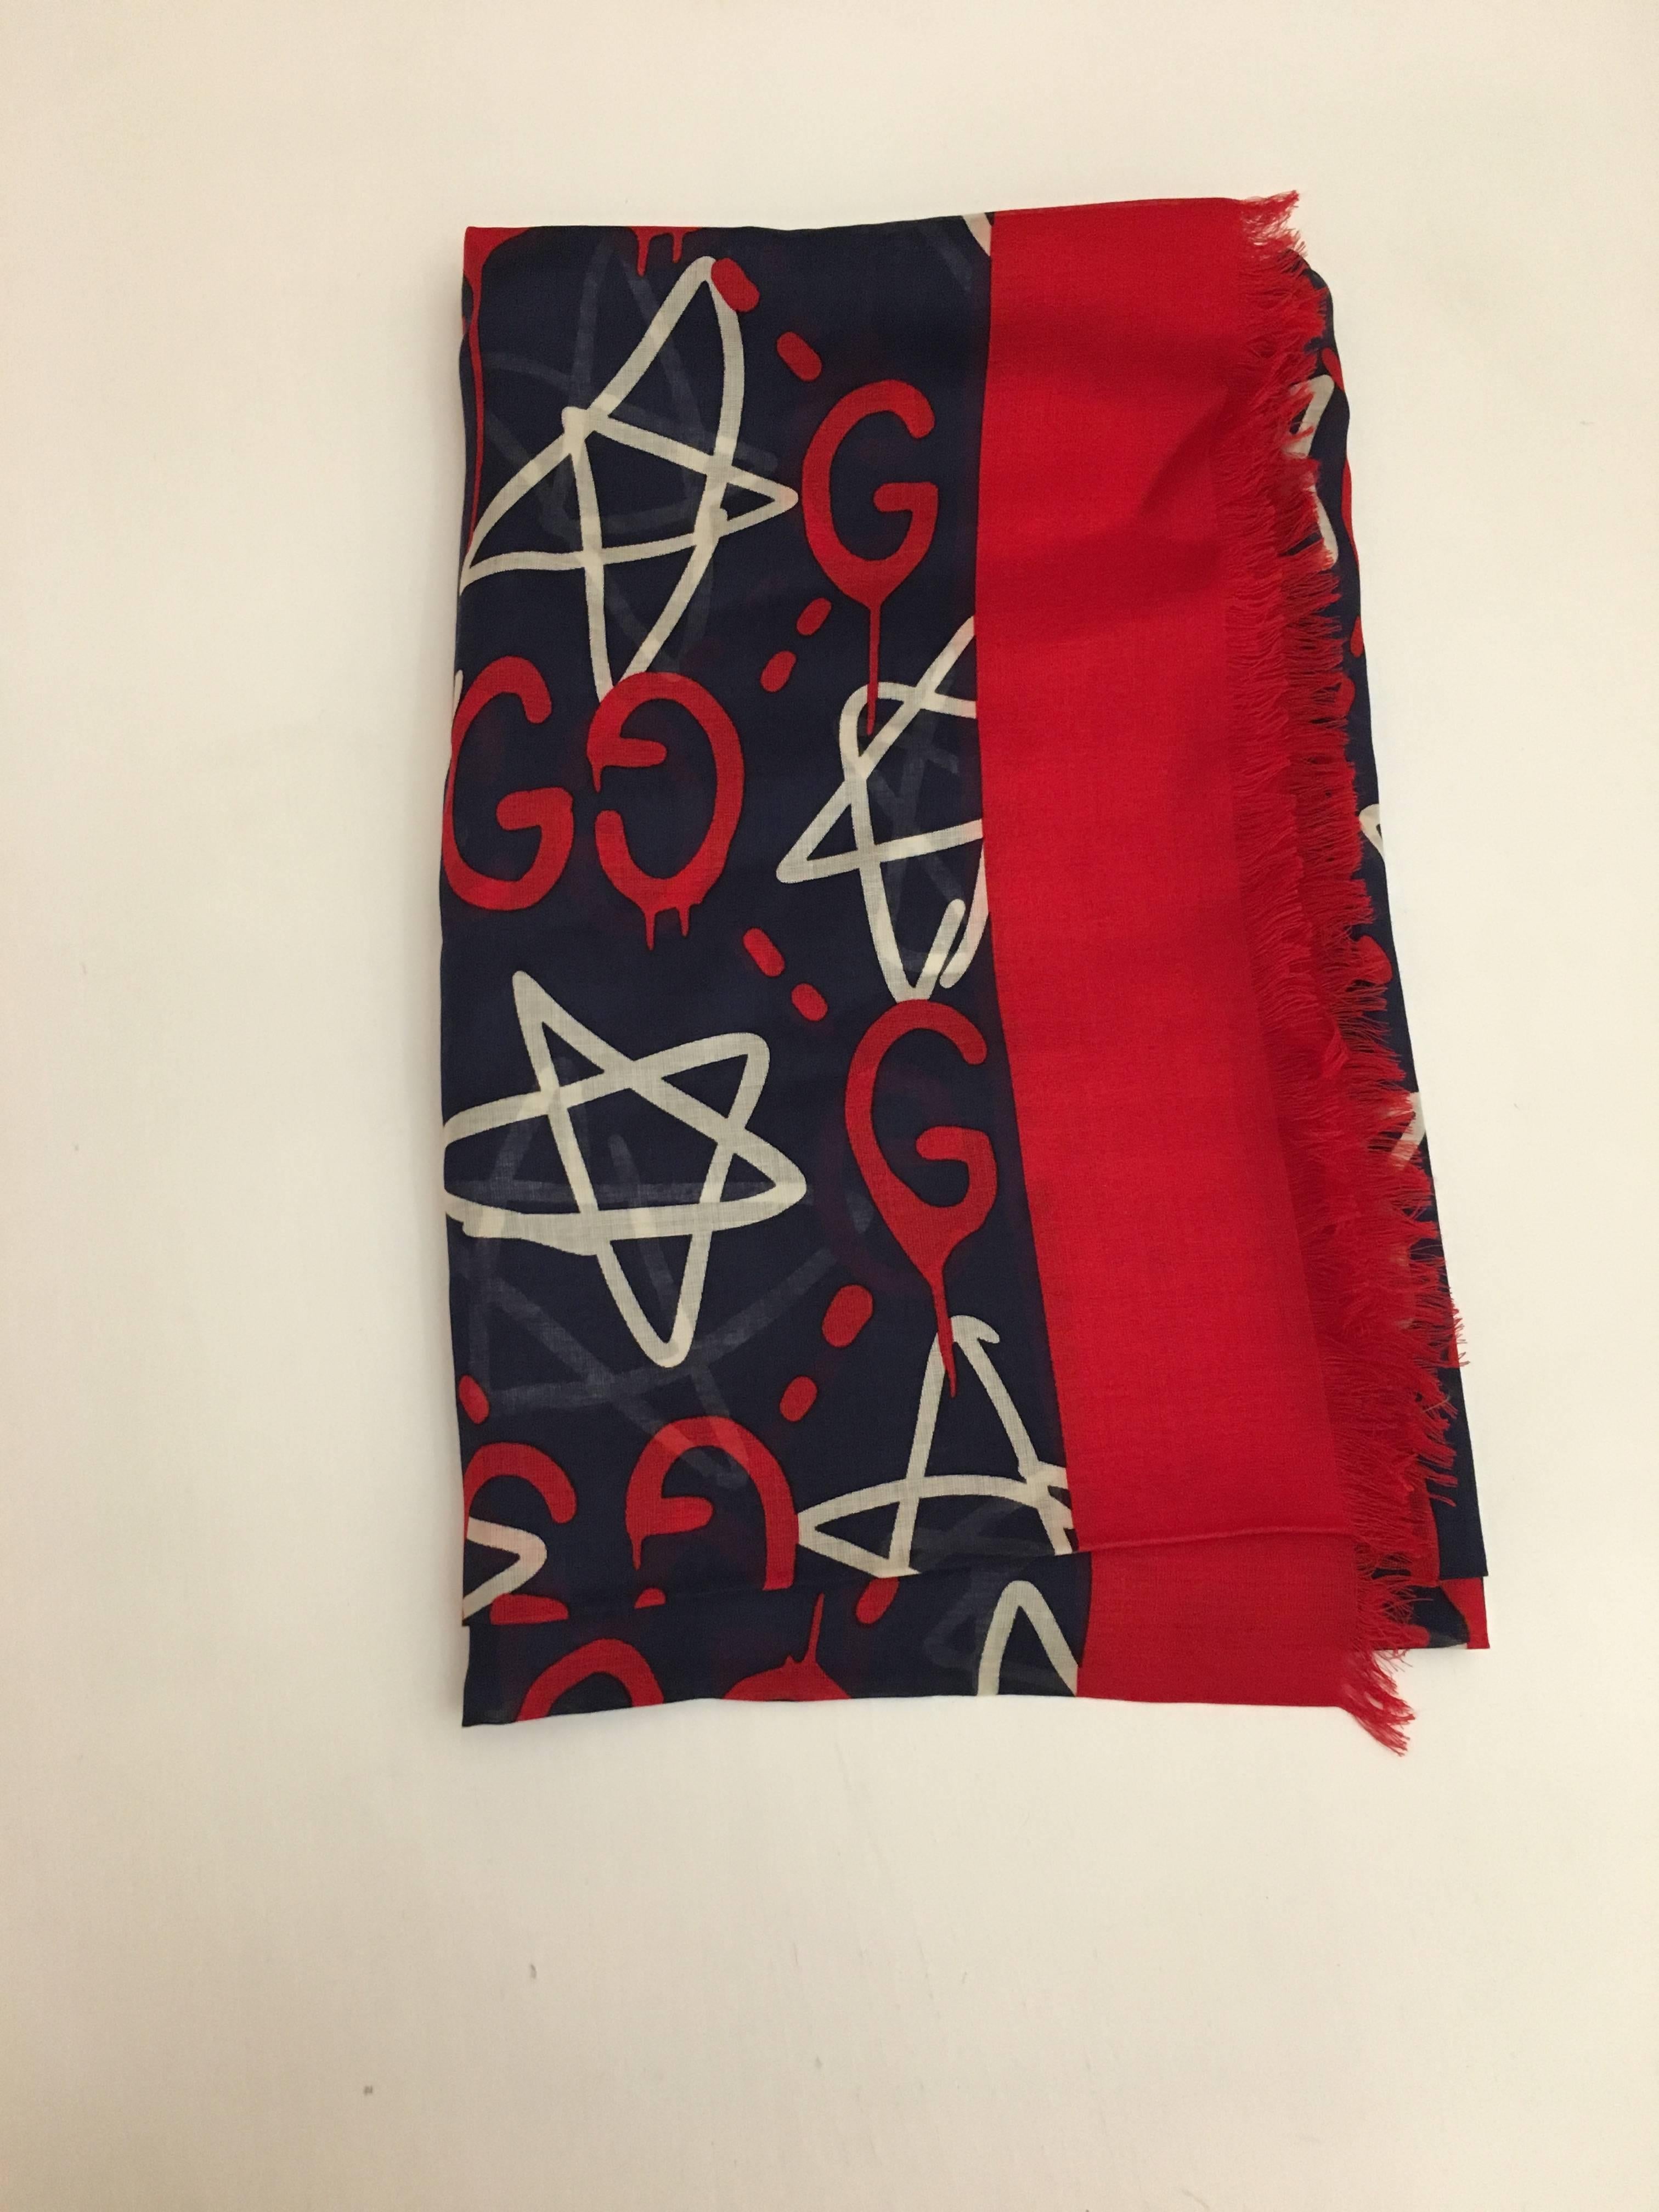 Gucci Ghost Shawl, Red

Fringe edge
Width 140 cm, Height 140 cm
85% modal and 15% silk
Made in Italy